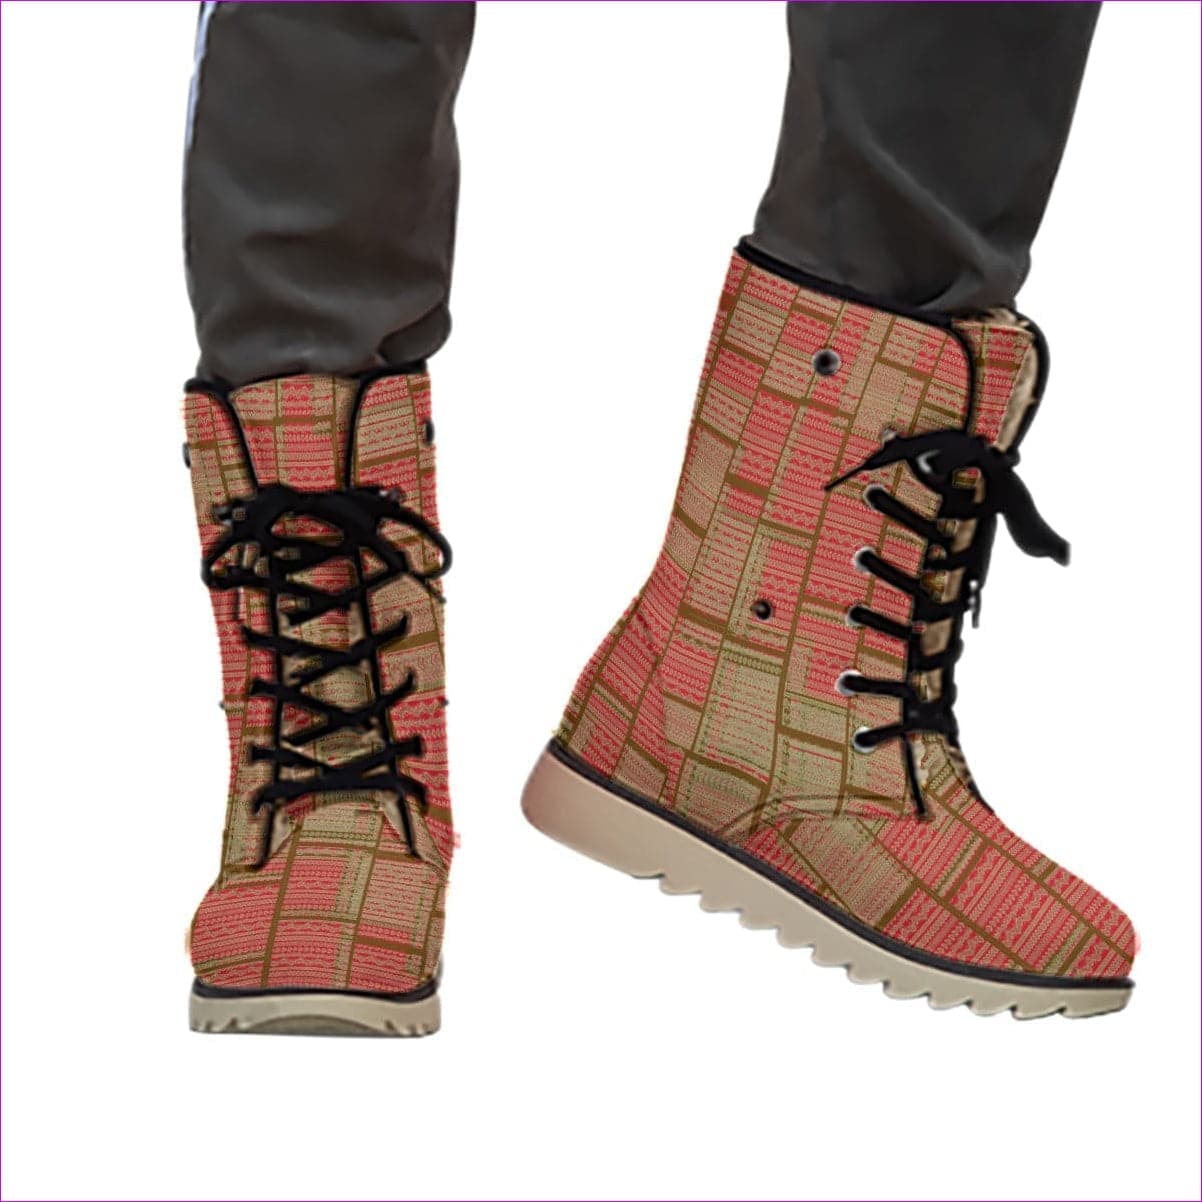 Chained 2 Womens Plush Boots - women's boots at TFC&H Co.